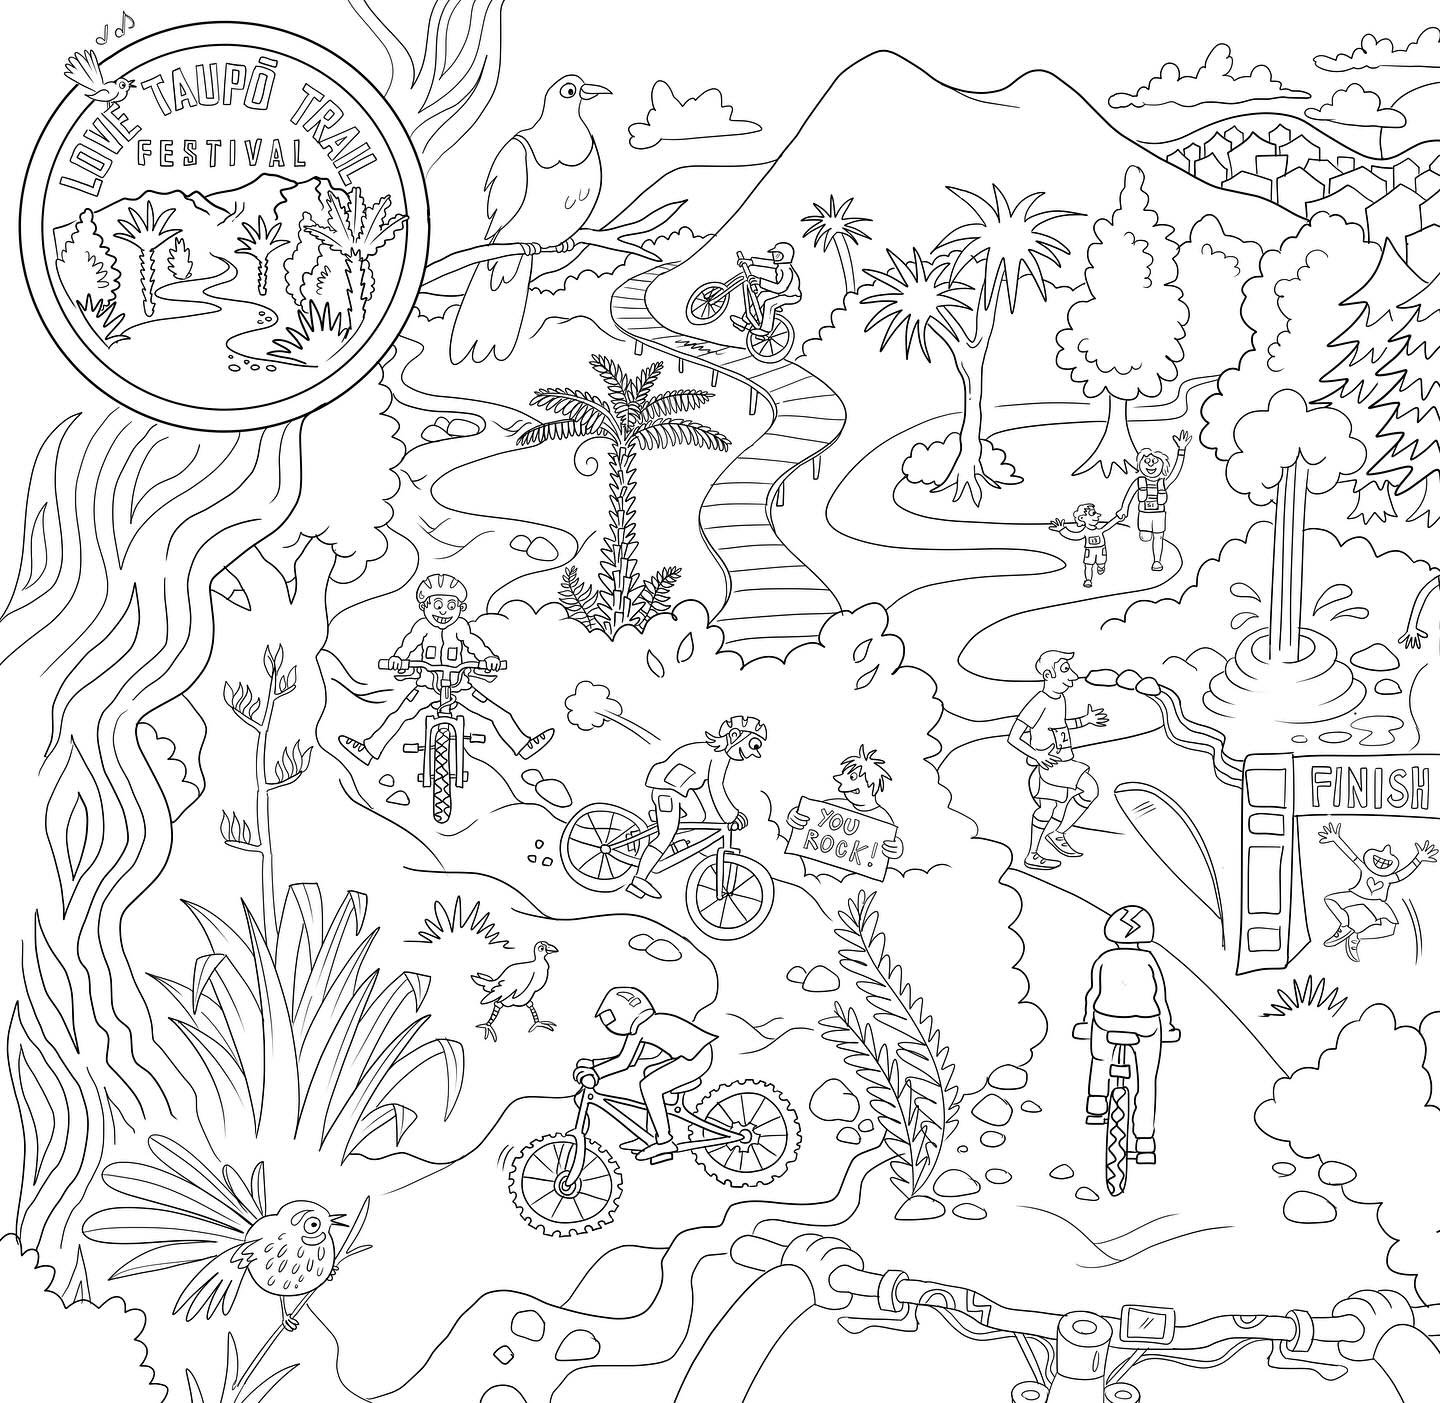 Sneak peak of our supercool piece of art work by @dawntufferyart! 

It will be up on display (you won&rsquo;t be able to miss it!) over the Love Taupo Trail Festival weekend for you all to colour in! 

#socool #weloveit #colouringin #lovetaupo #trail